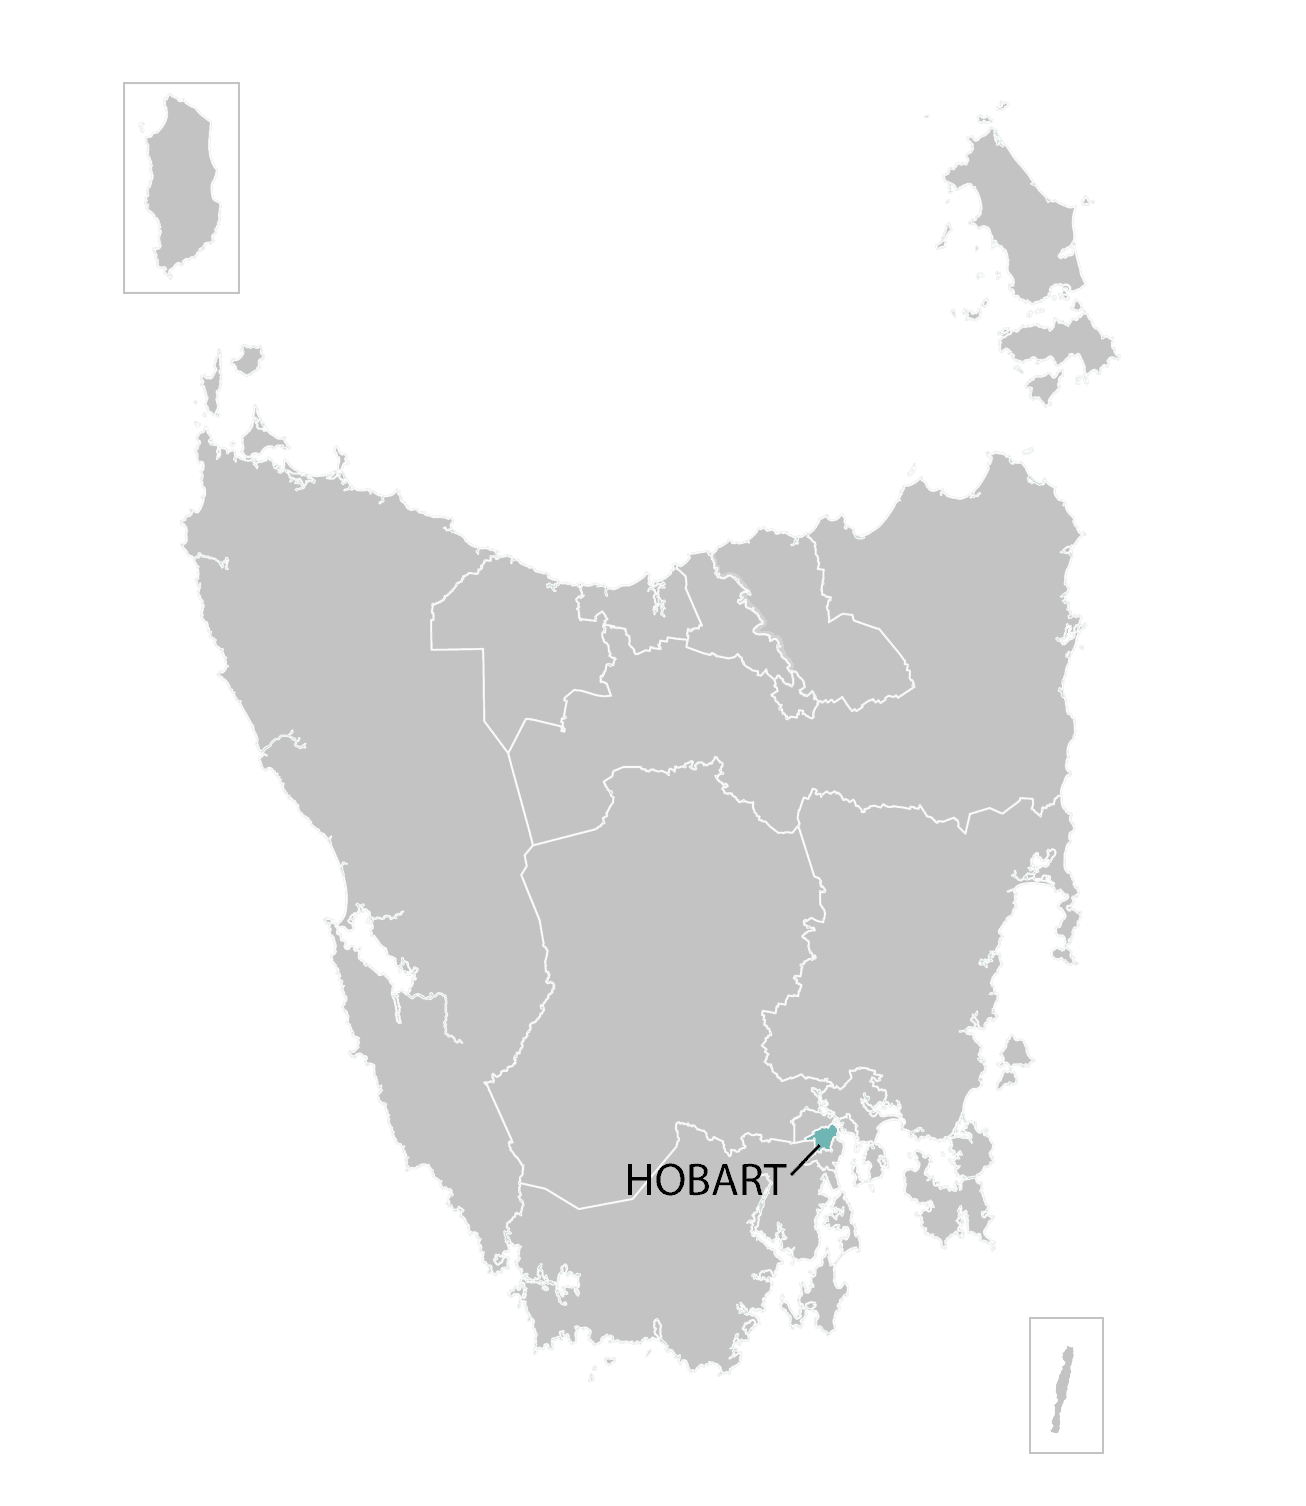 Hobart division highlighted on illustrated map of Tasmania